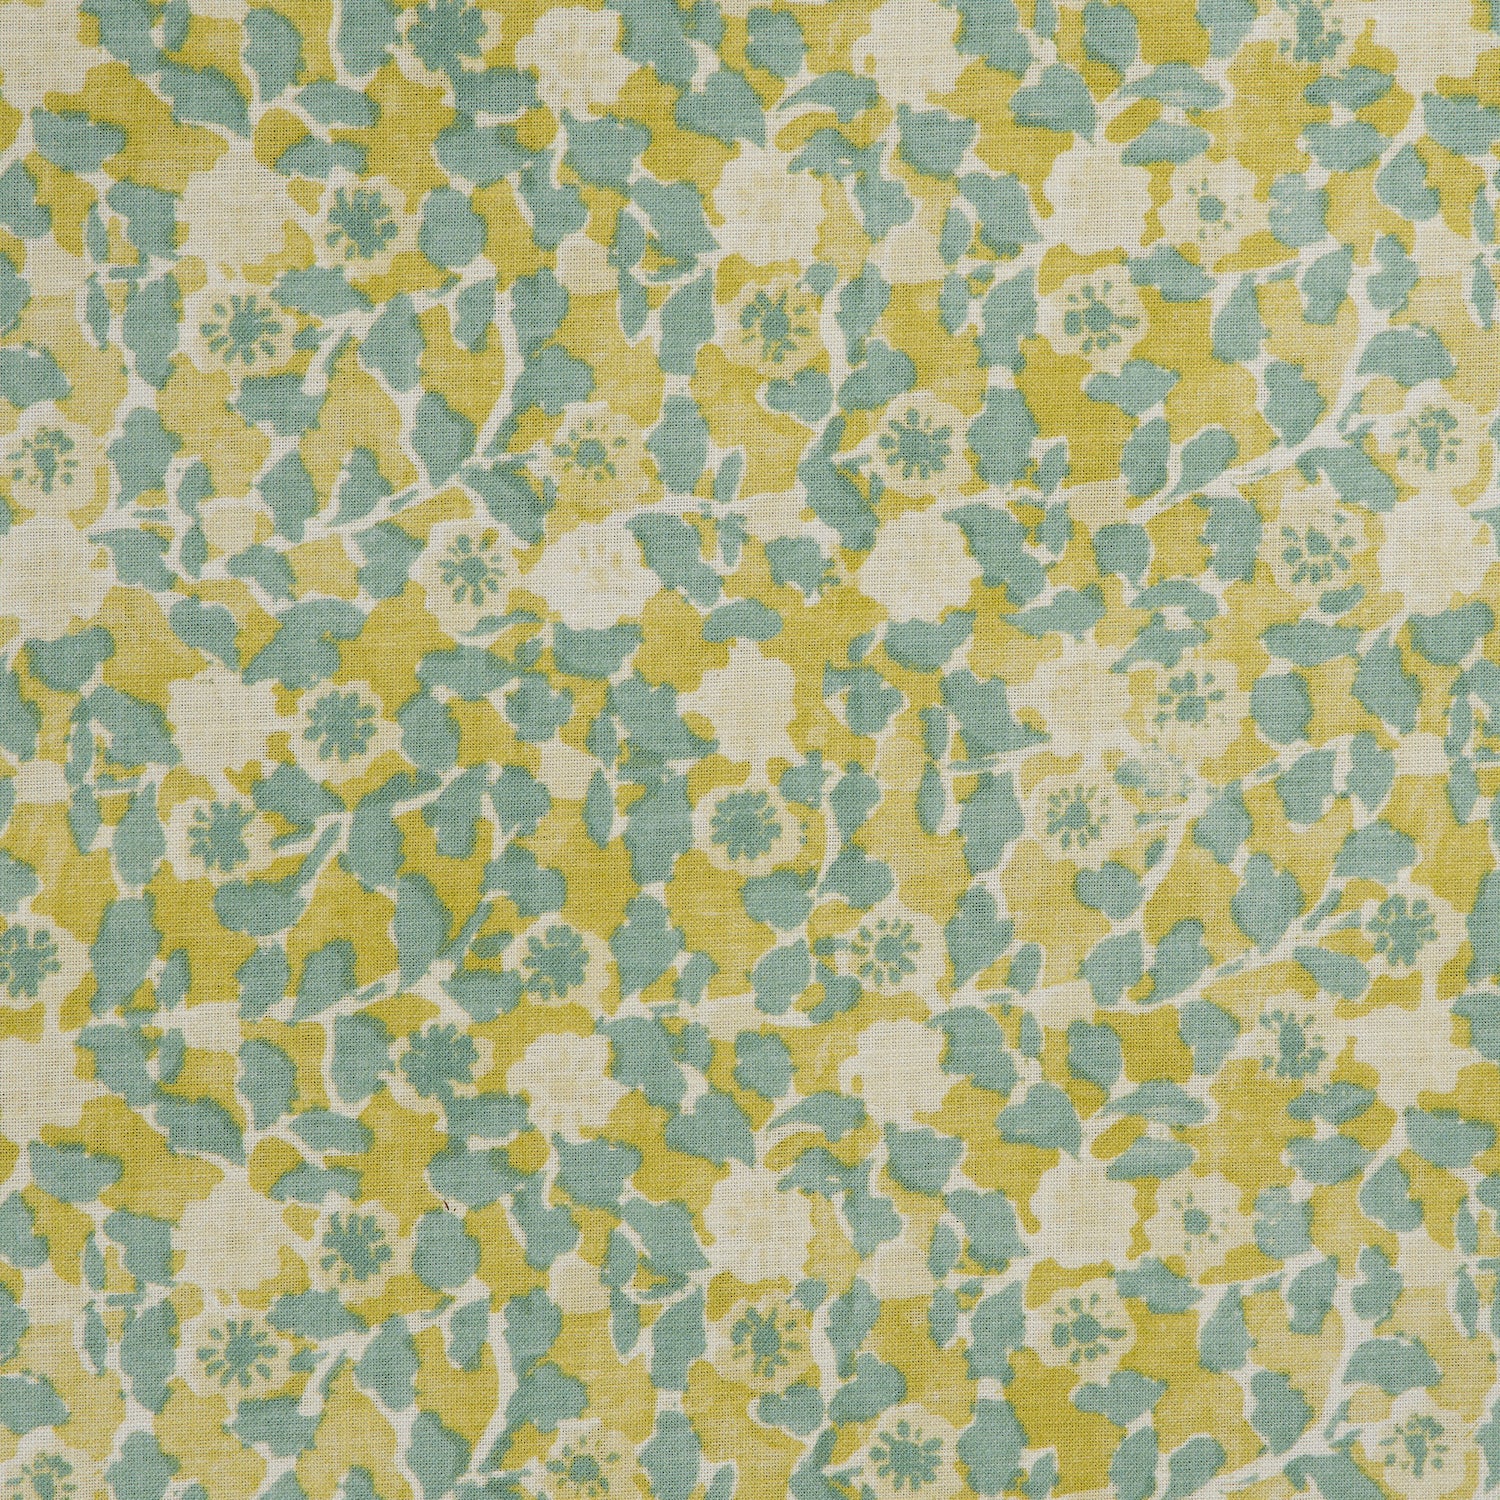 Detail of a linen fabric in a painterly floral pattern in mustard and blue on a cream field.